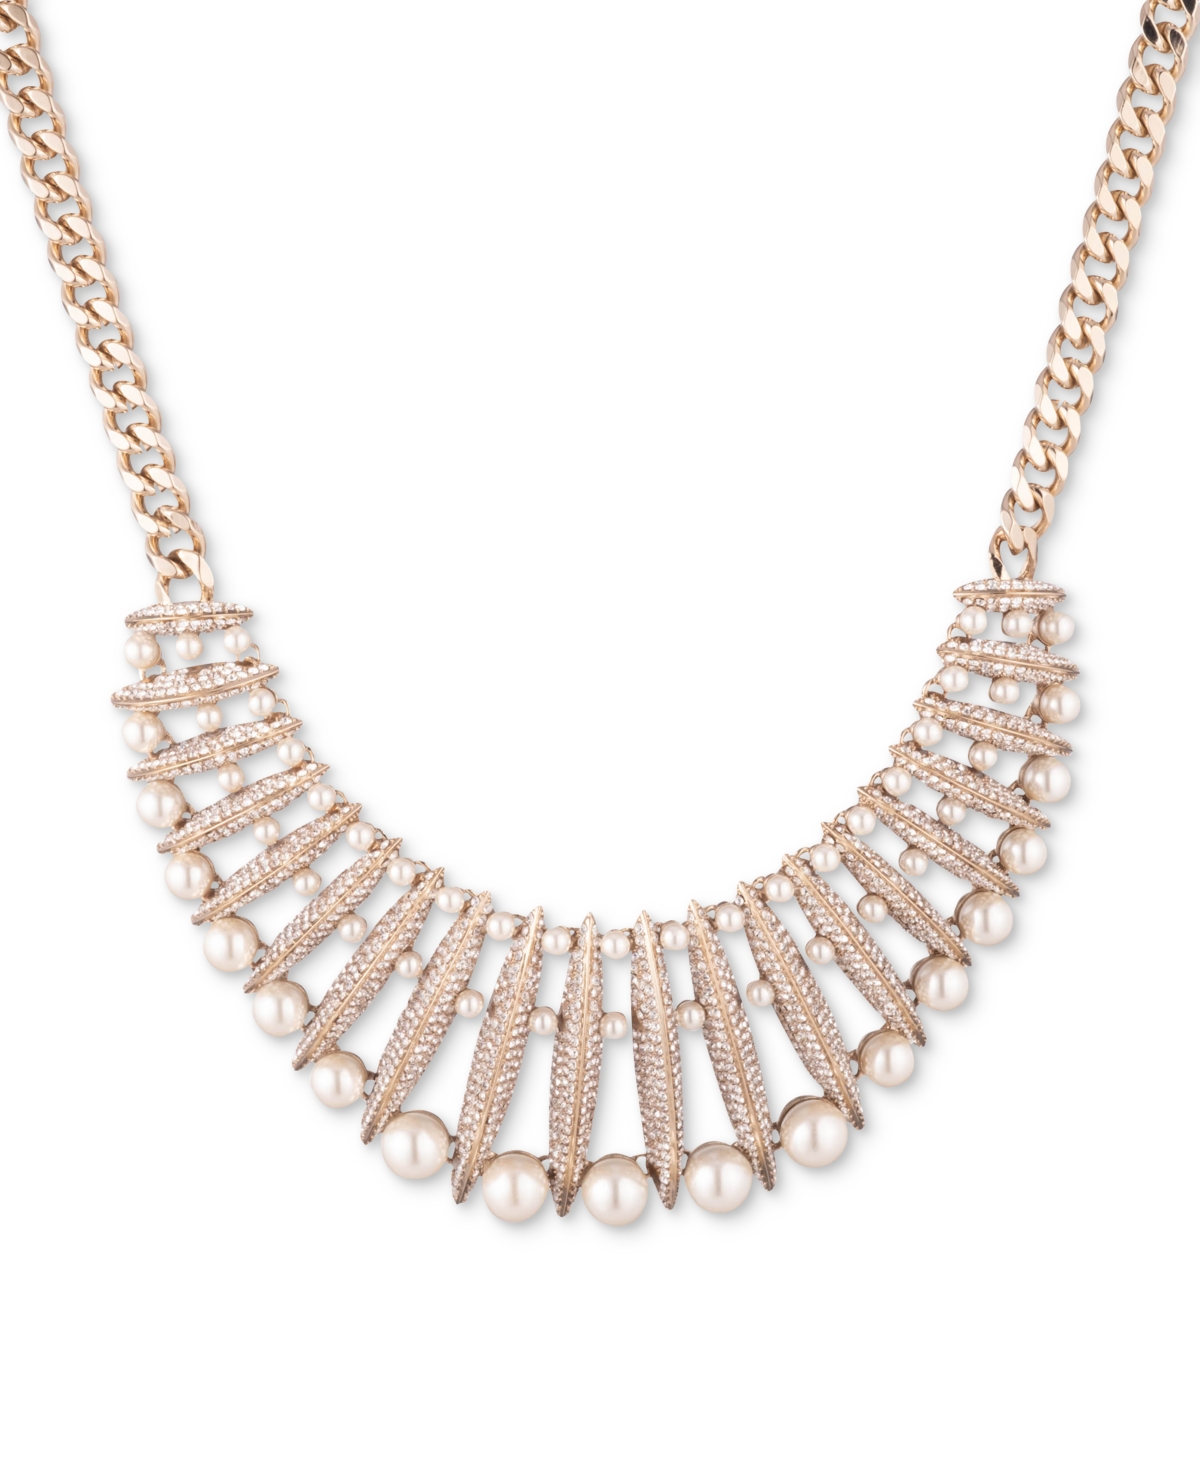 Gold-Tone Champagne Imitation Pearl Crystal Statement Collar Necklace, 16" + 3" extender - White